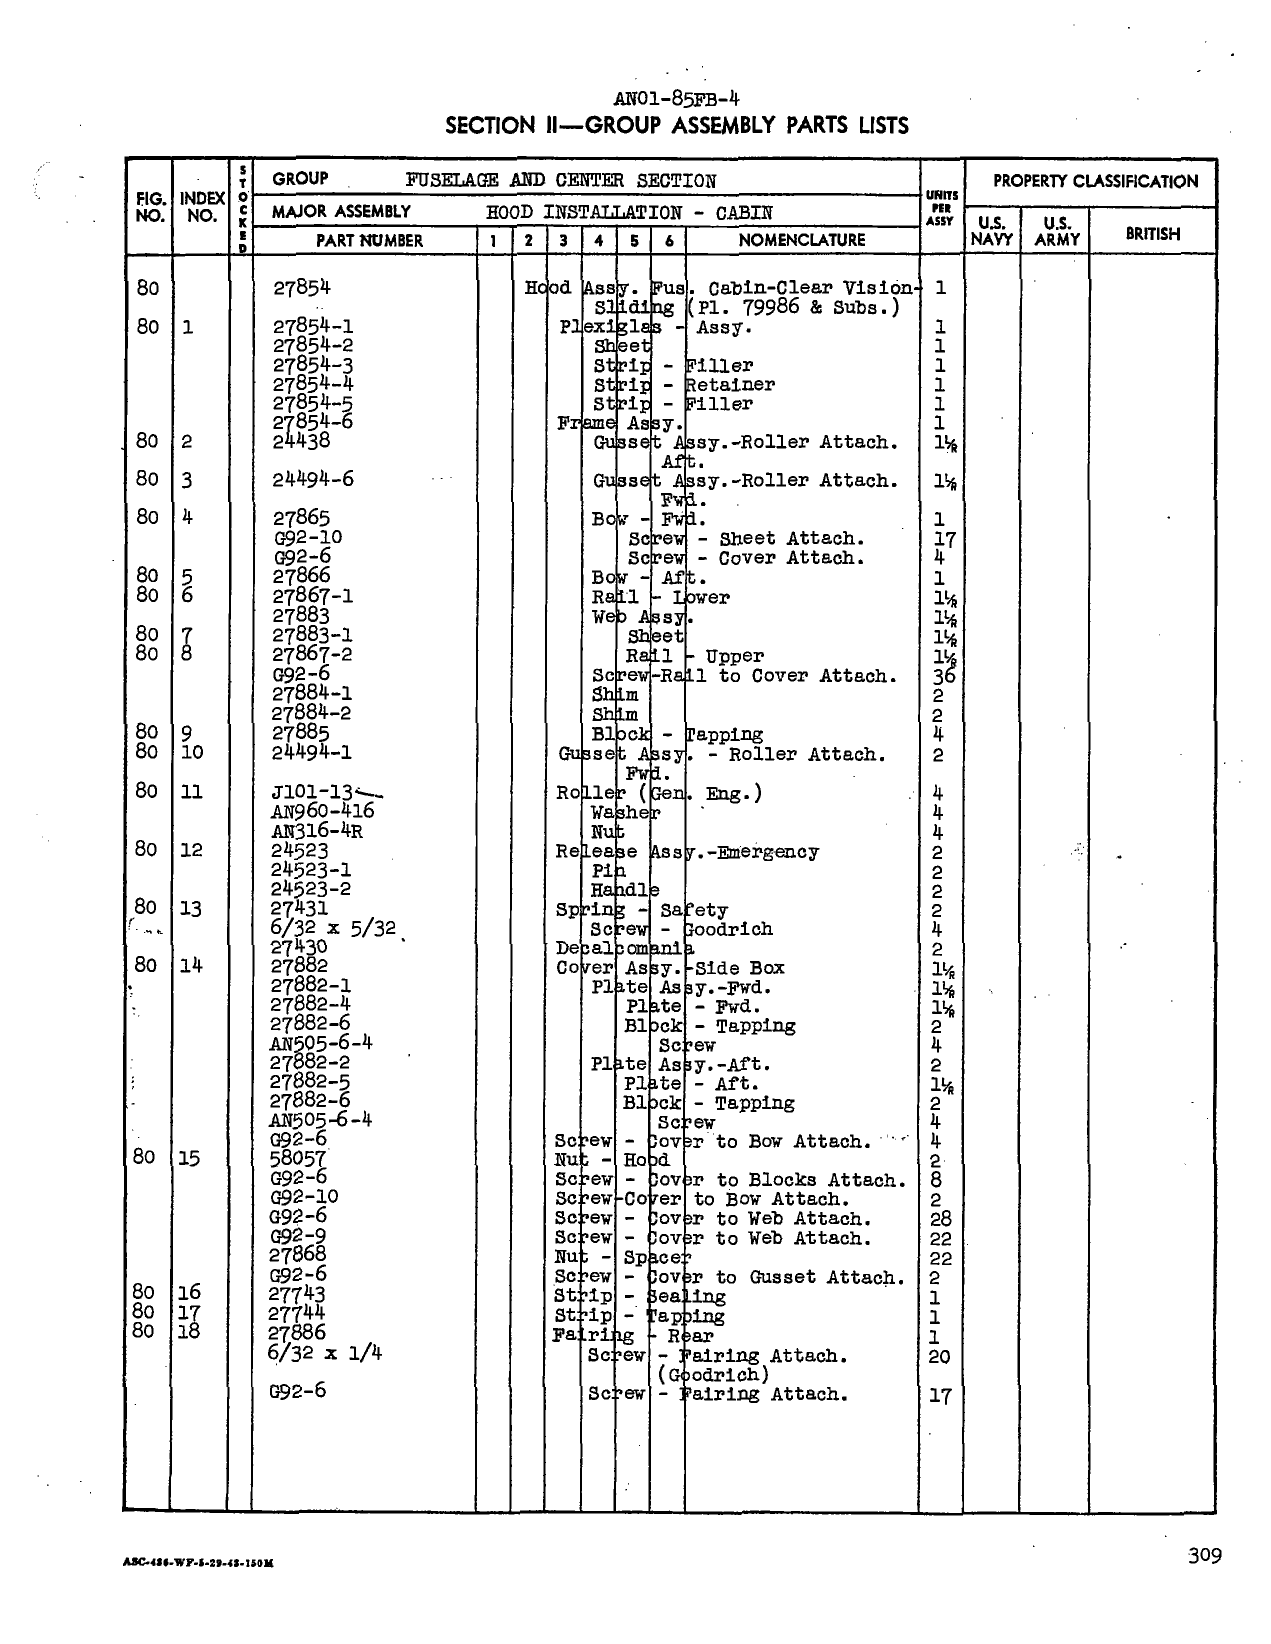 Sample page 317 from AirCorps Library document: Parts Catalog - F6F-3, F6F-5